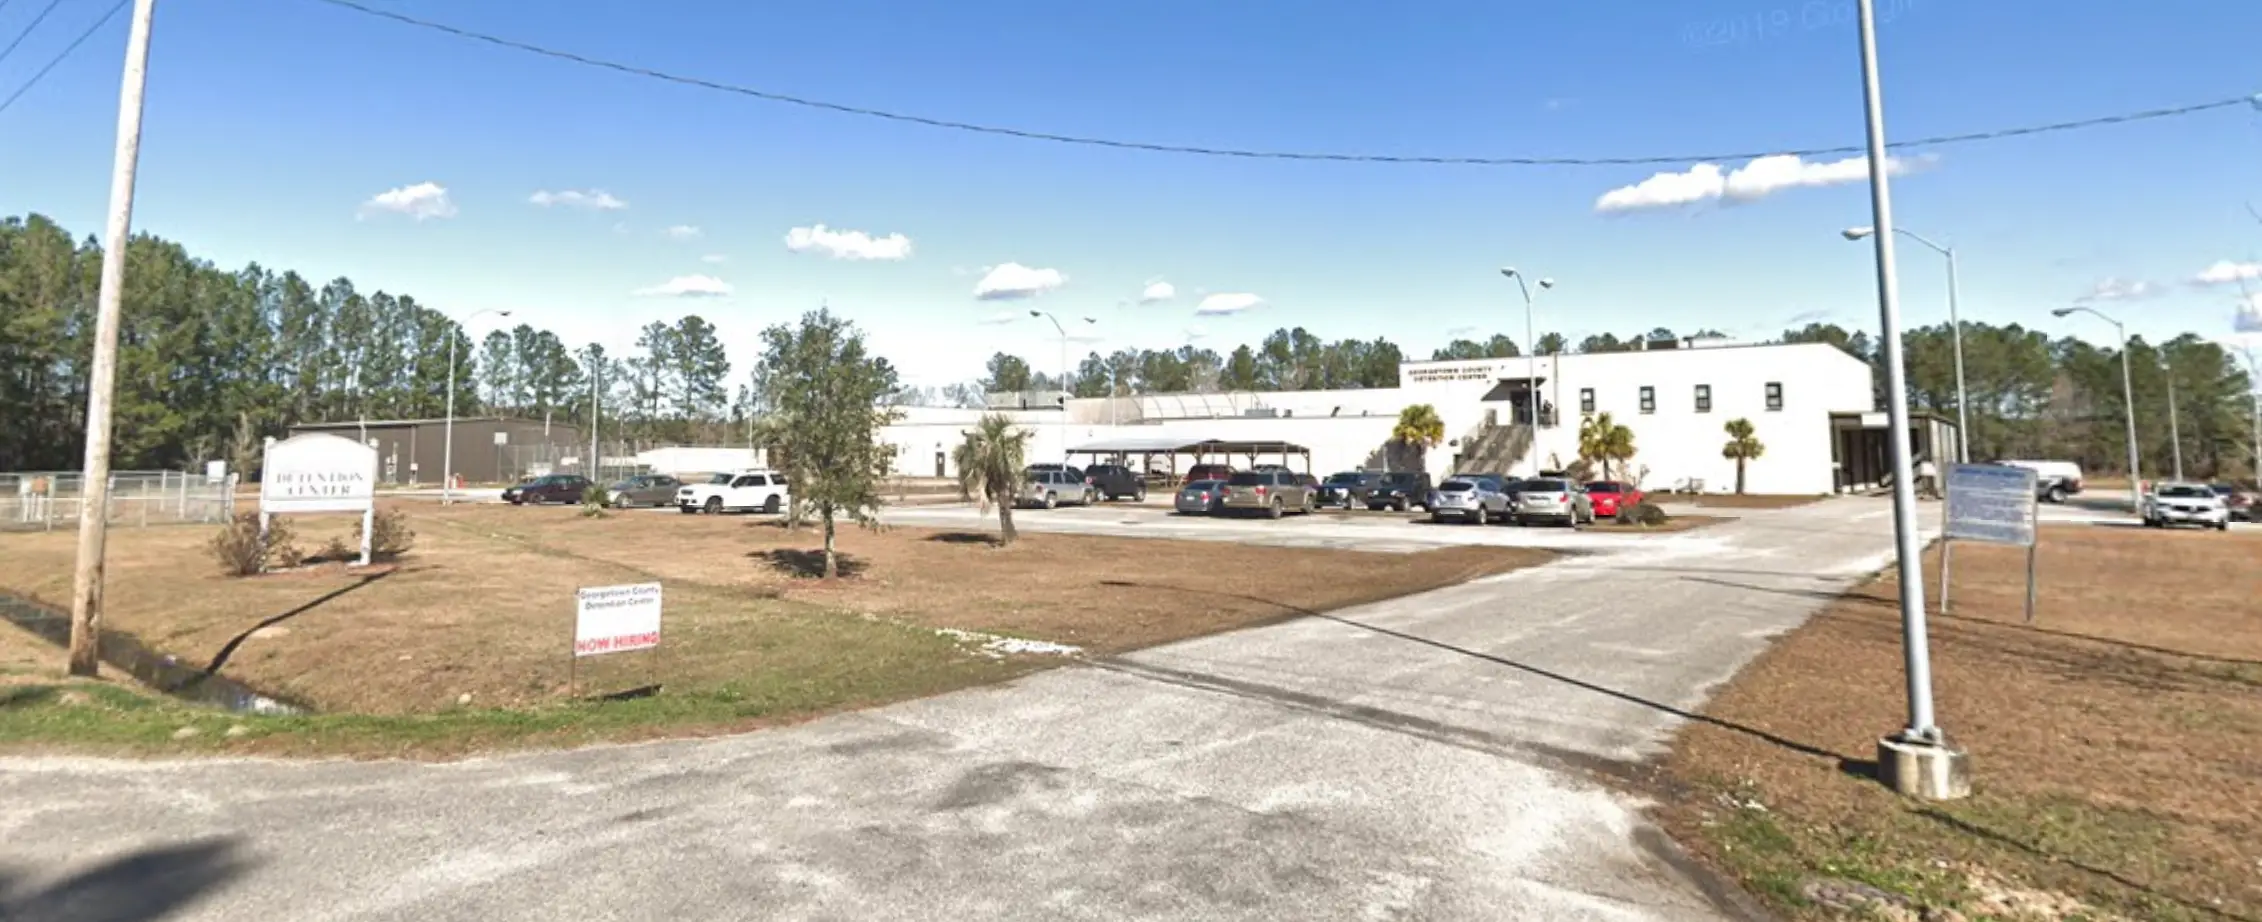 Georgetown County Detention Center, Georgetown, SC (South Carolina)